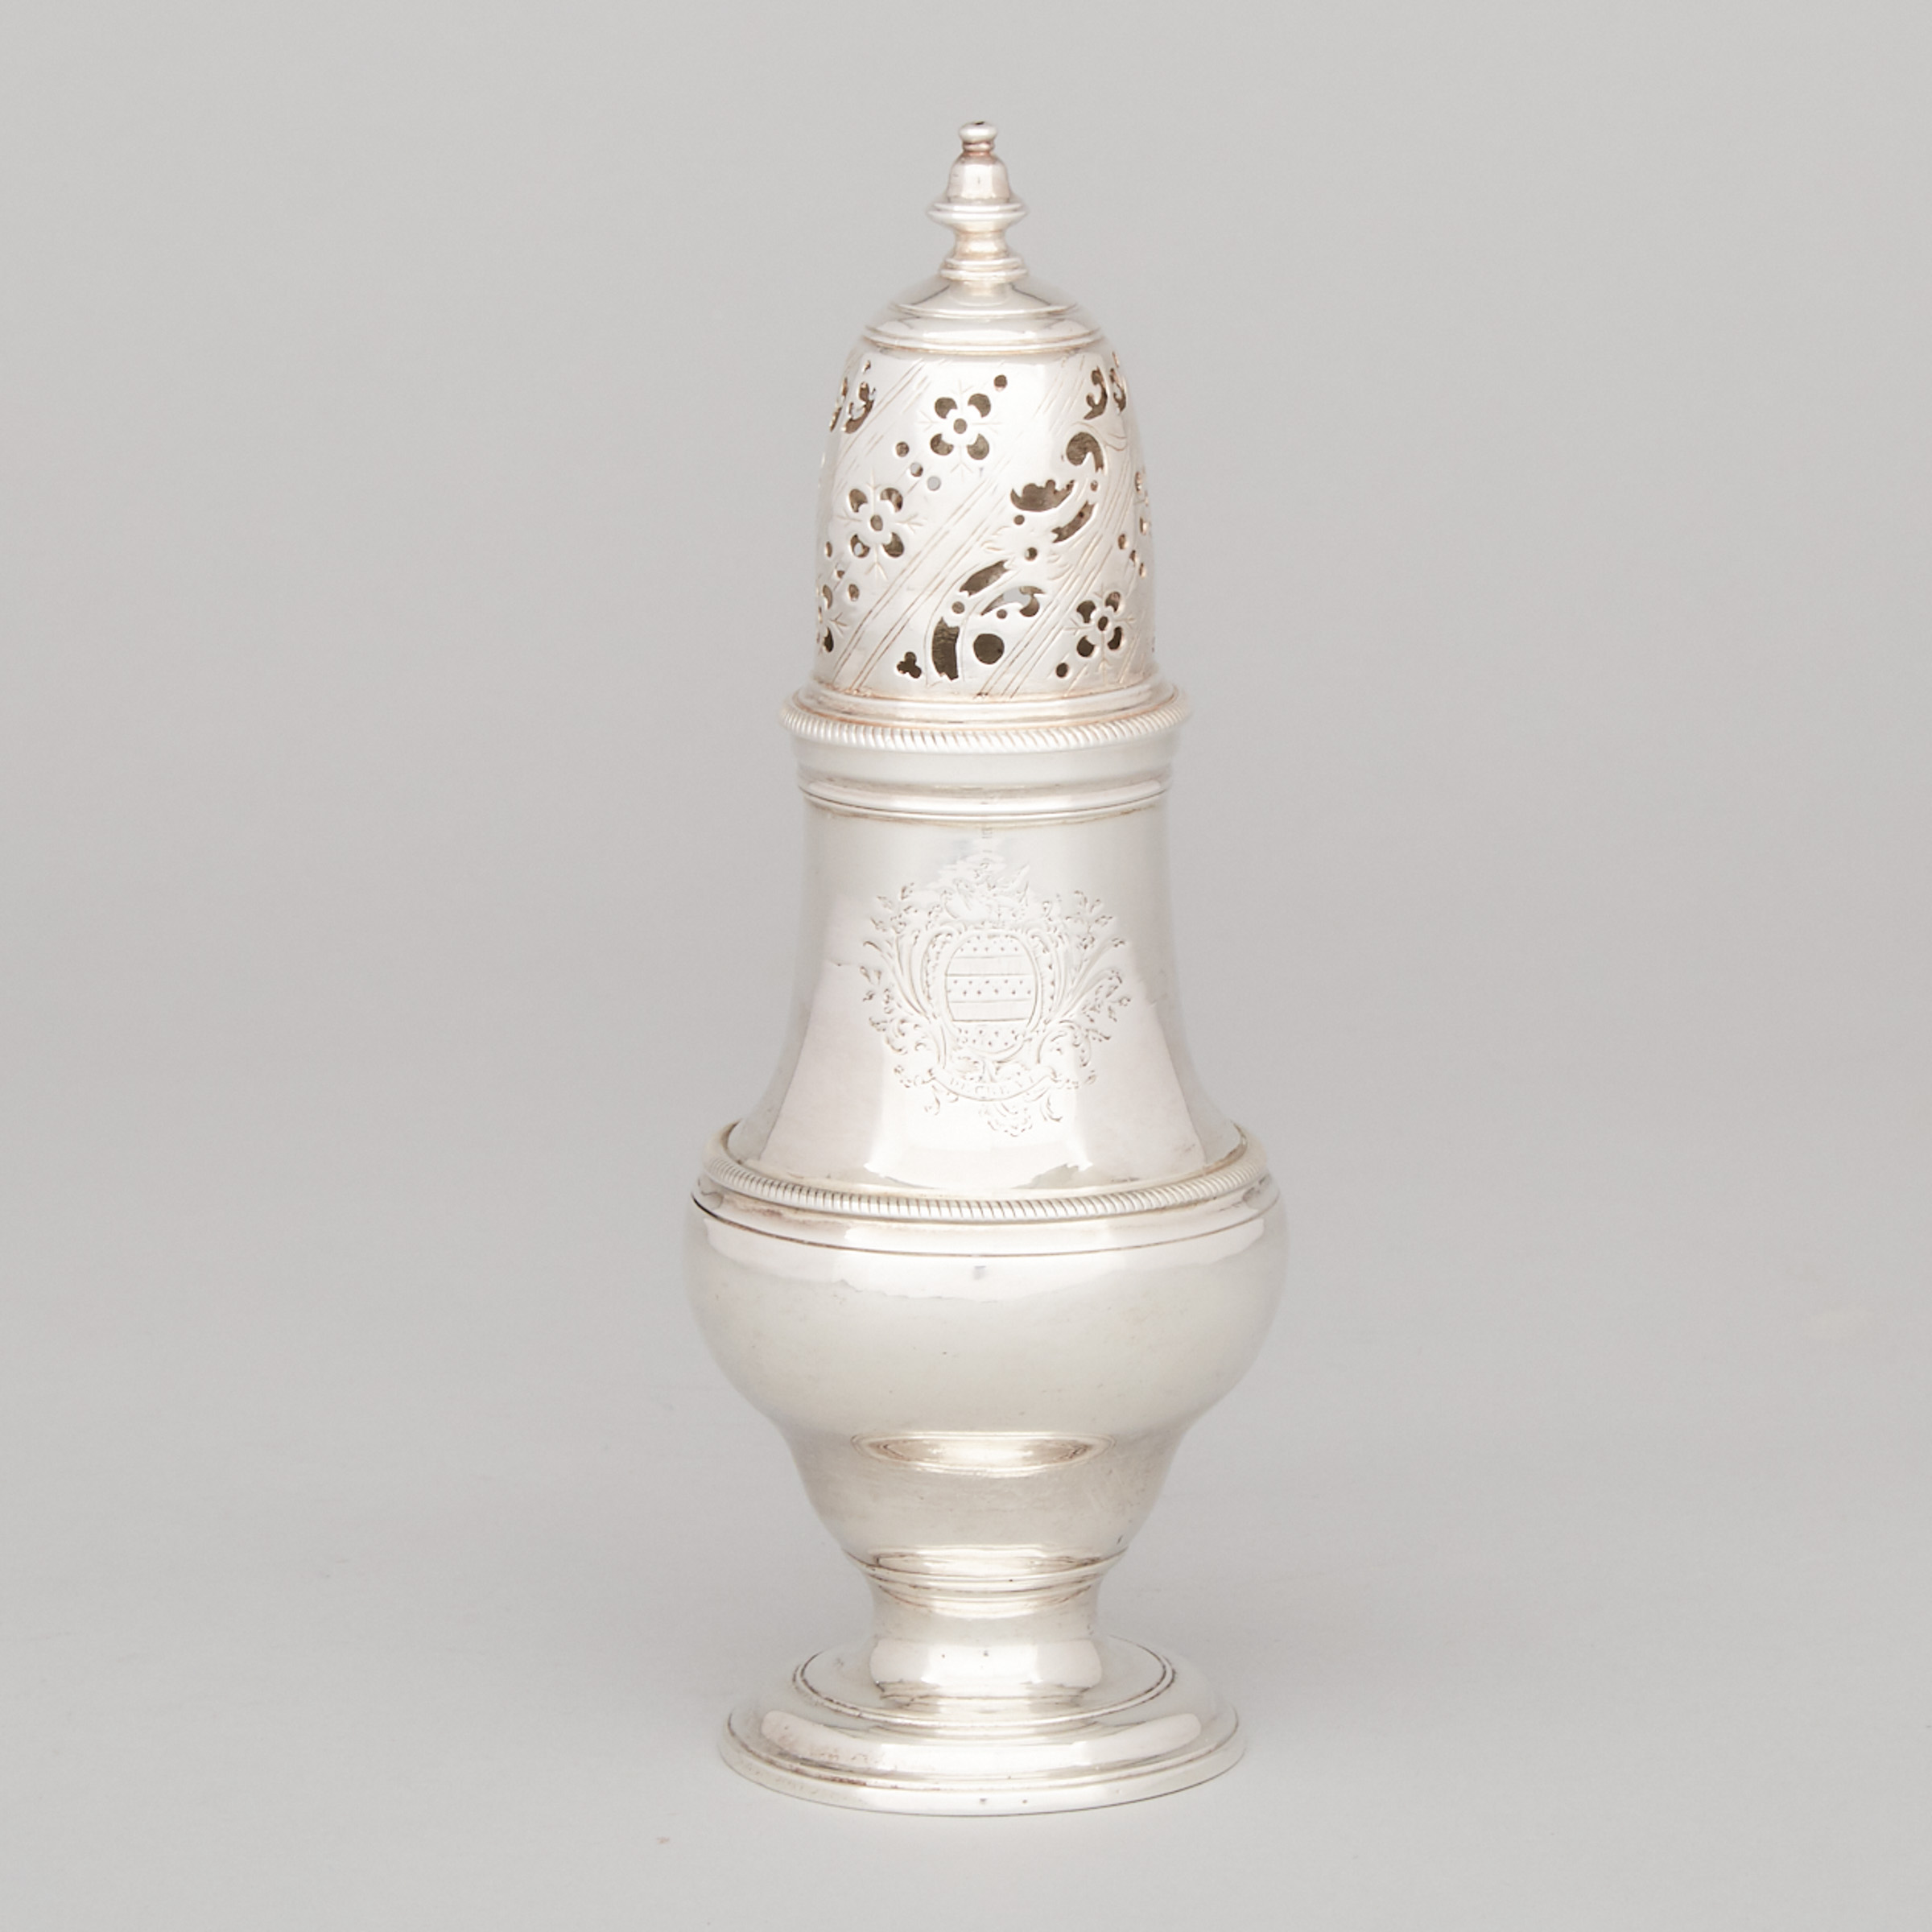 George II Silver Baluster Caster, Jabez Daniell, London, 1753